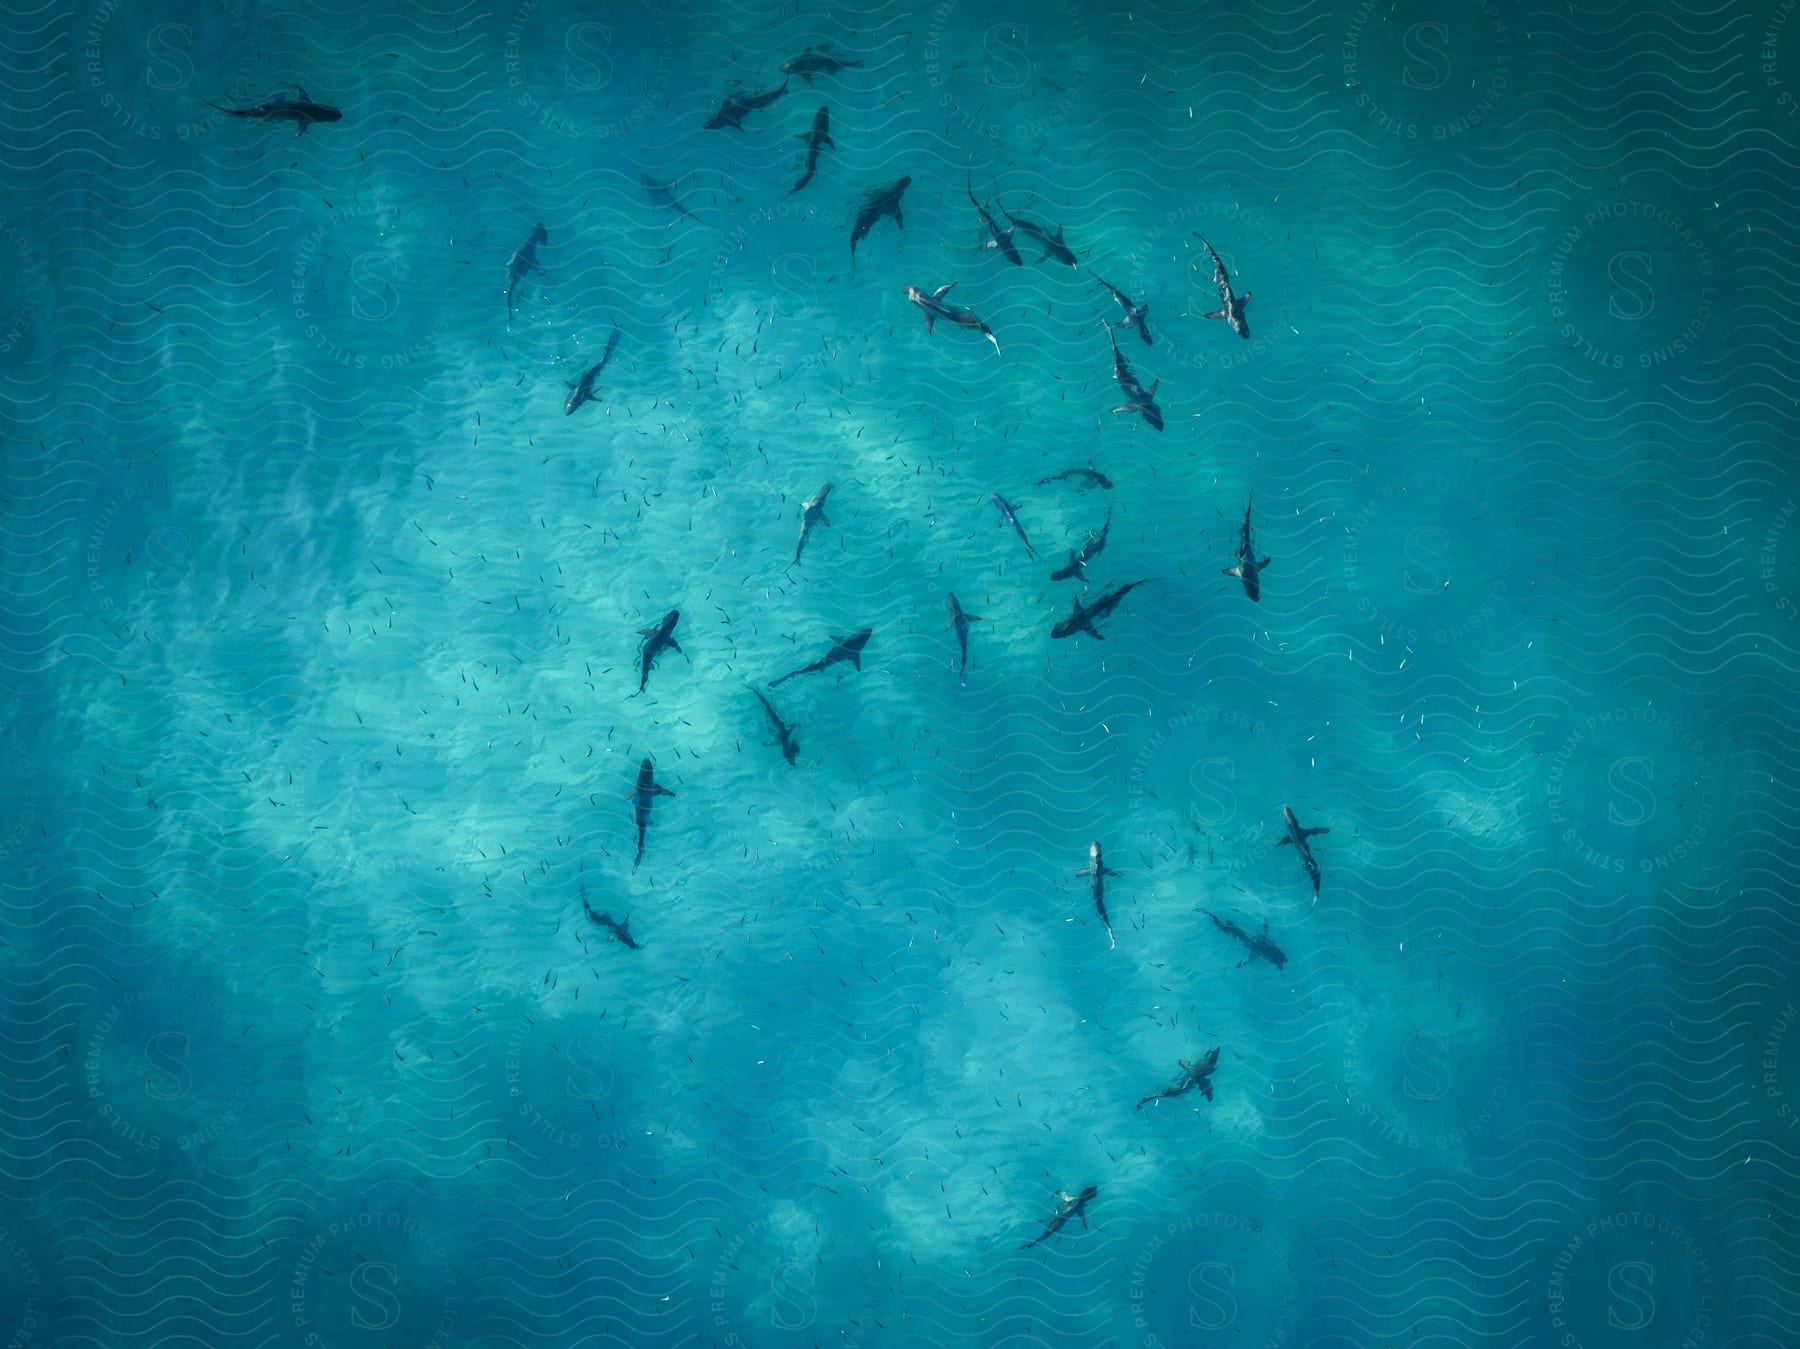 Aerial view of a school of sharks swimming in clear blue water